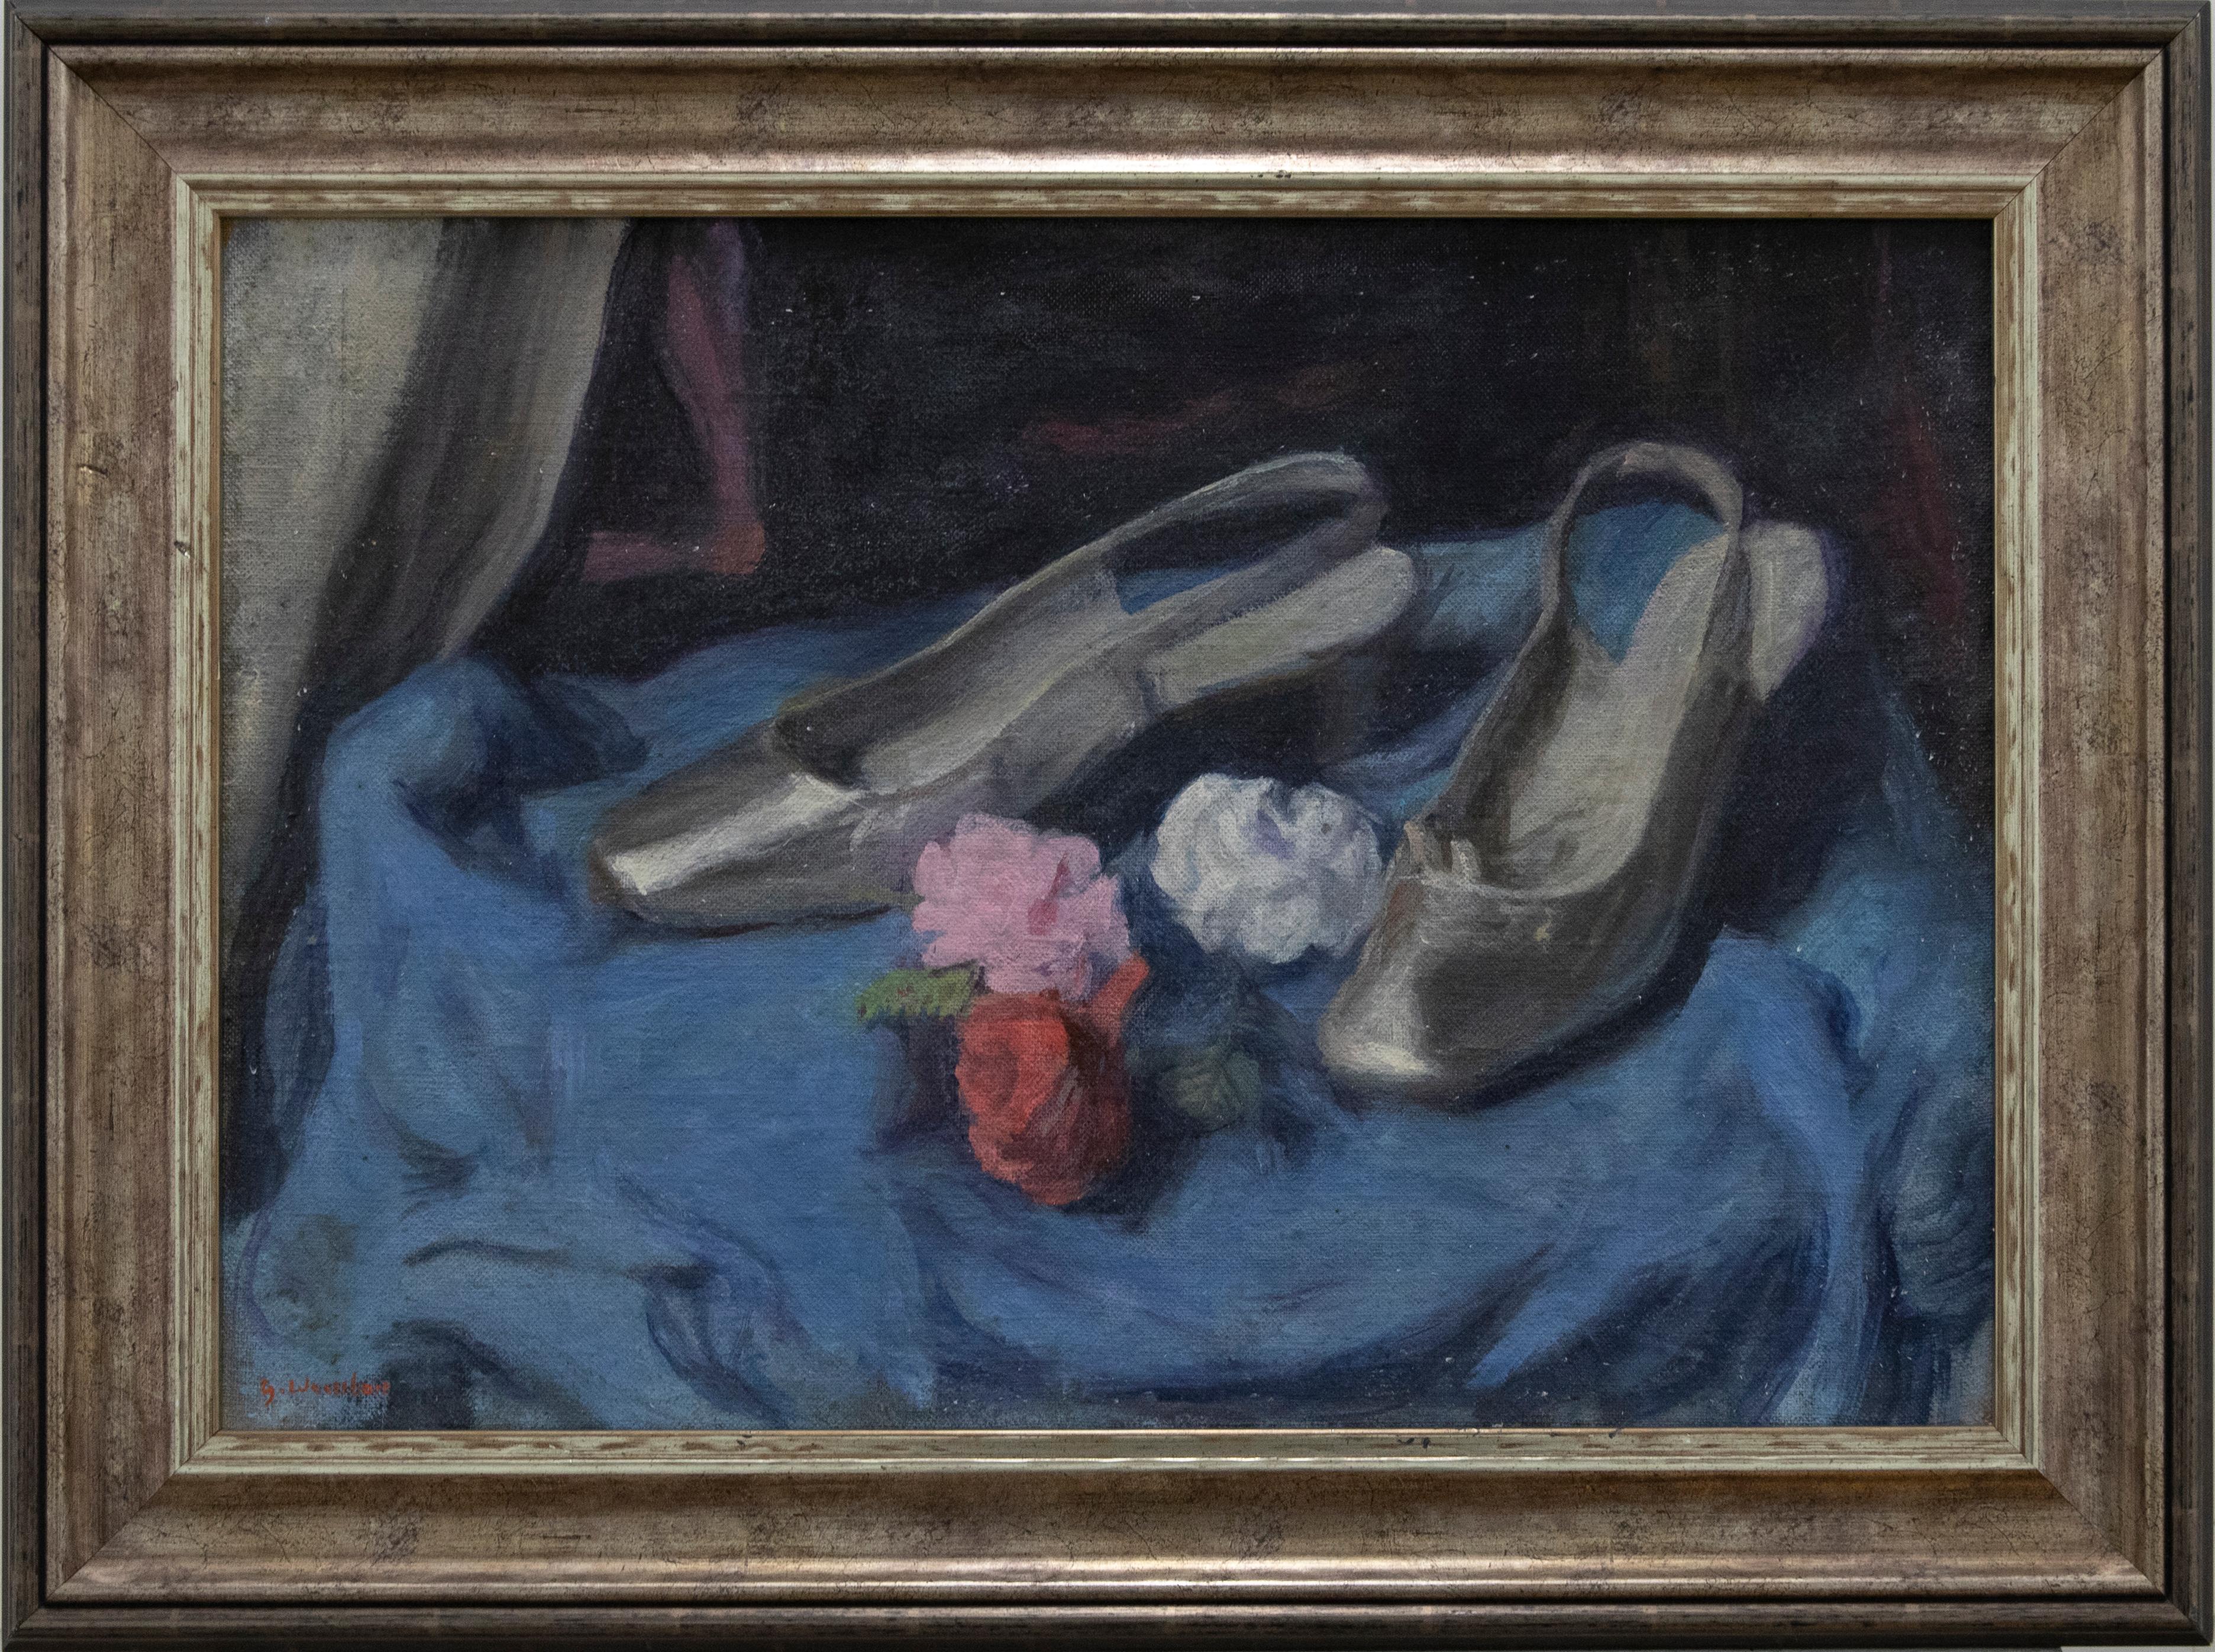 A fine 20th Century still life, executed with sensitivity and finesse. A pair of silver shoes sit upon a plush velvet fabric with an array of spring flowers. Well presented in a contemporary silver gilt frame. Signed. On canvas board. 